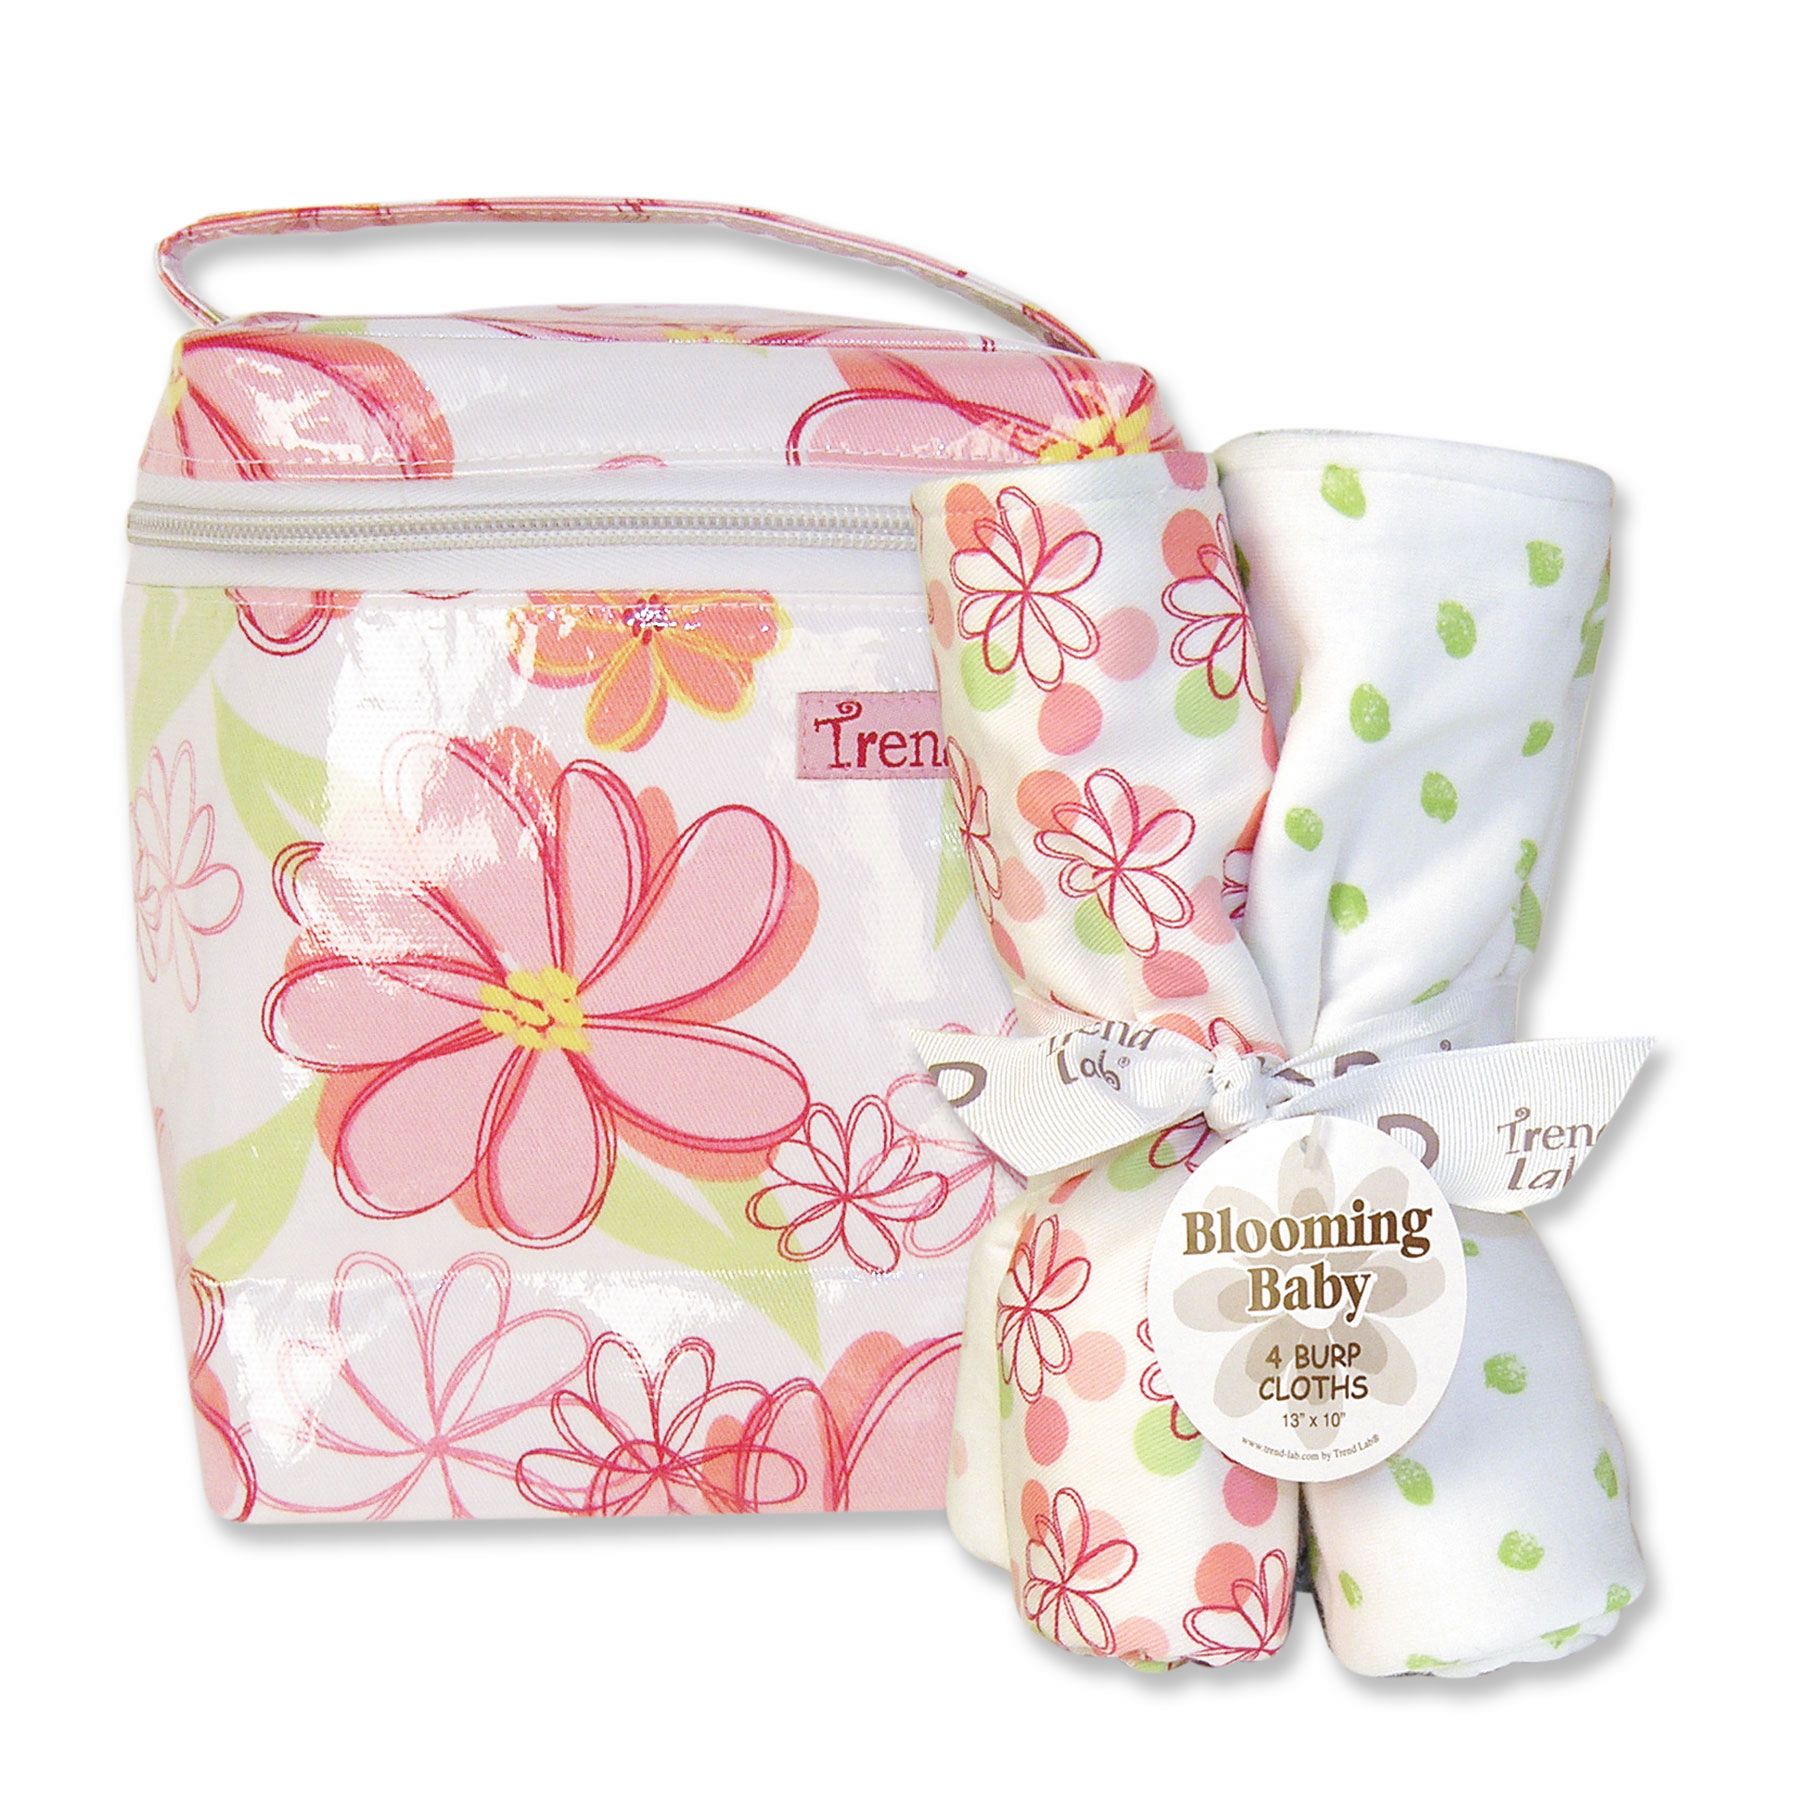 Trend Lab Hula Baby Bottle Bag and Burp Cloth Set   Baby   Baby